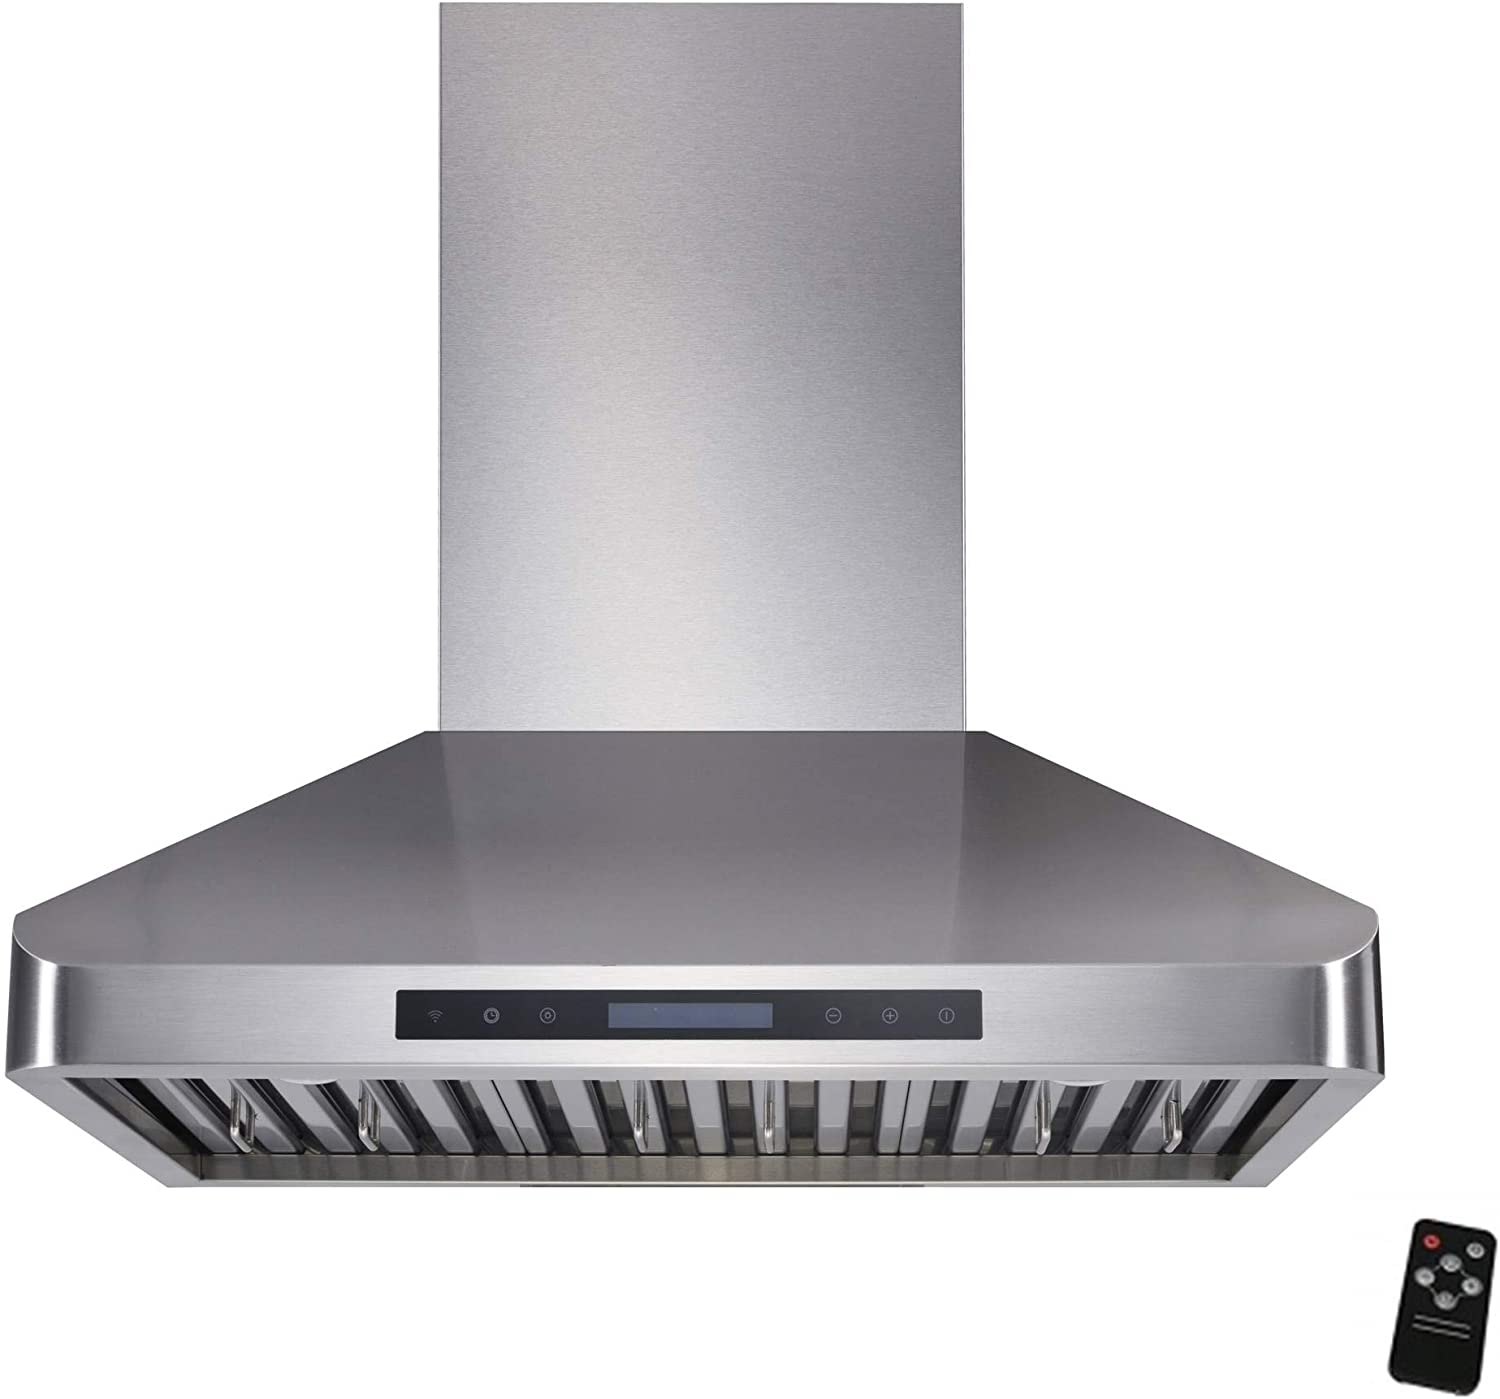 Awoco RH-WT-30XL 56-1/2"H Stainless Steel Range Hood 4 Speeds, 6” Round Top Vent 900CFM 2 LED Lights & Remote Control (30" Wall Mount XL)